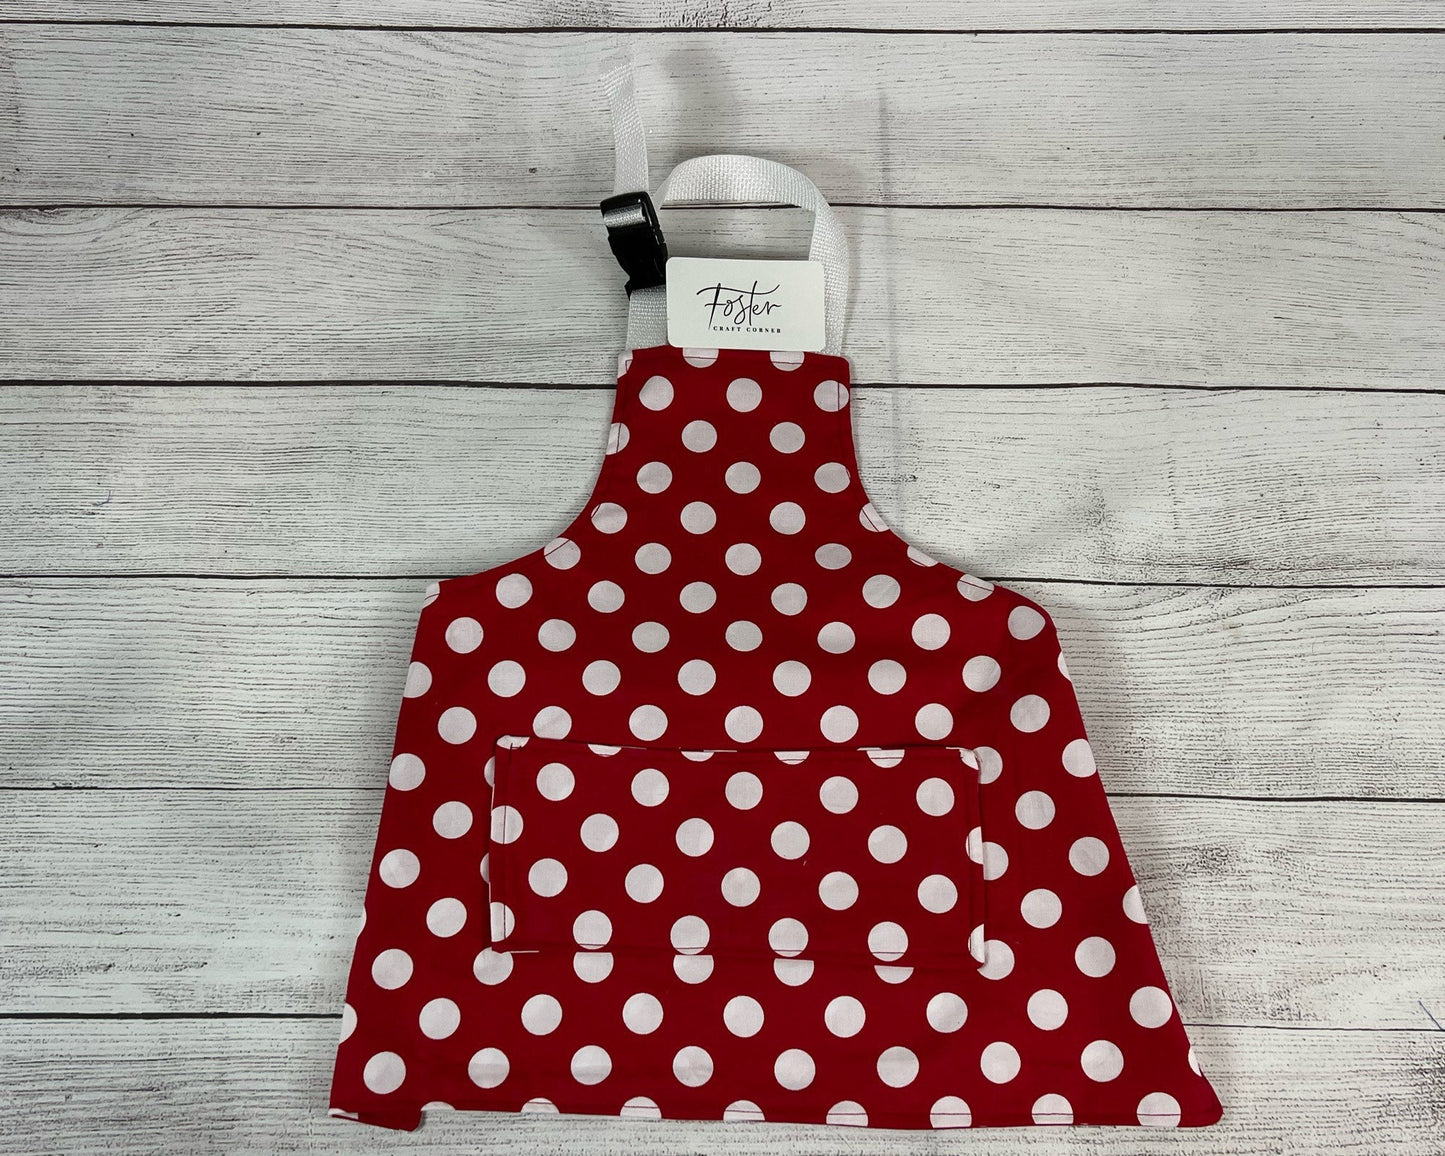 Toddler Apron - Kitchen - Cooking - Early Cooking Skills - Toddler Messes - Toddler Accessories - Polka Dot - Red and White - Small Apron